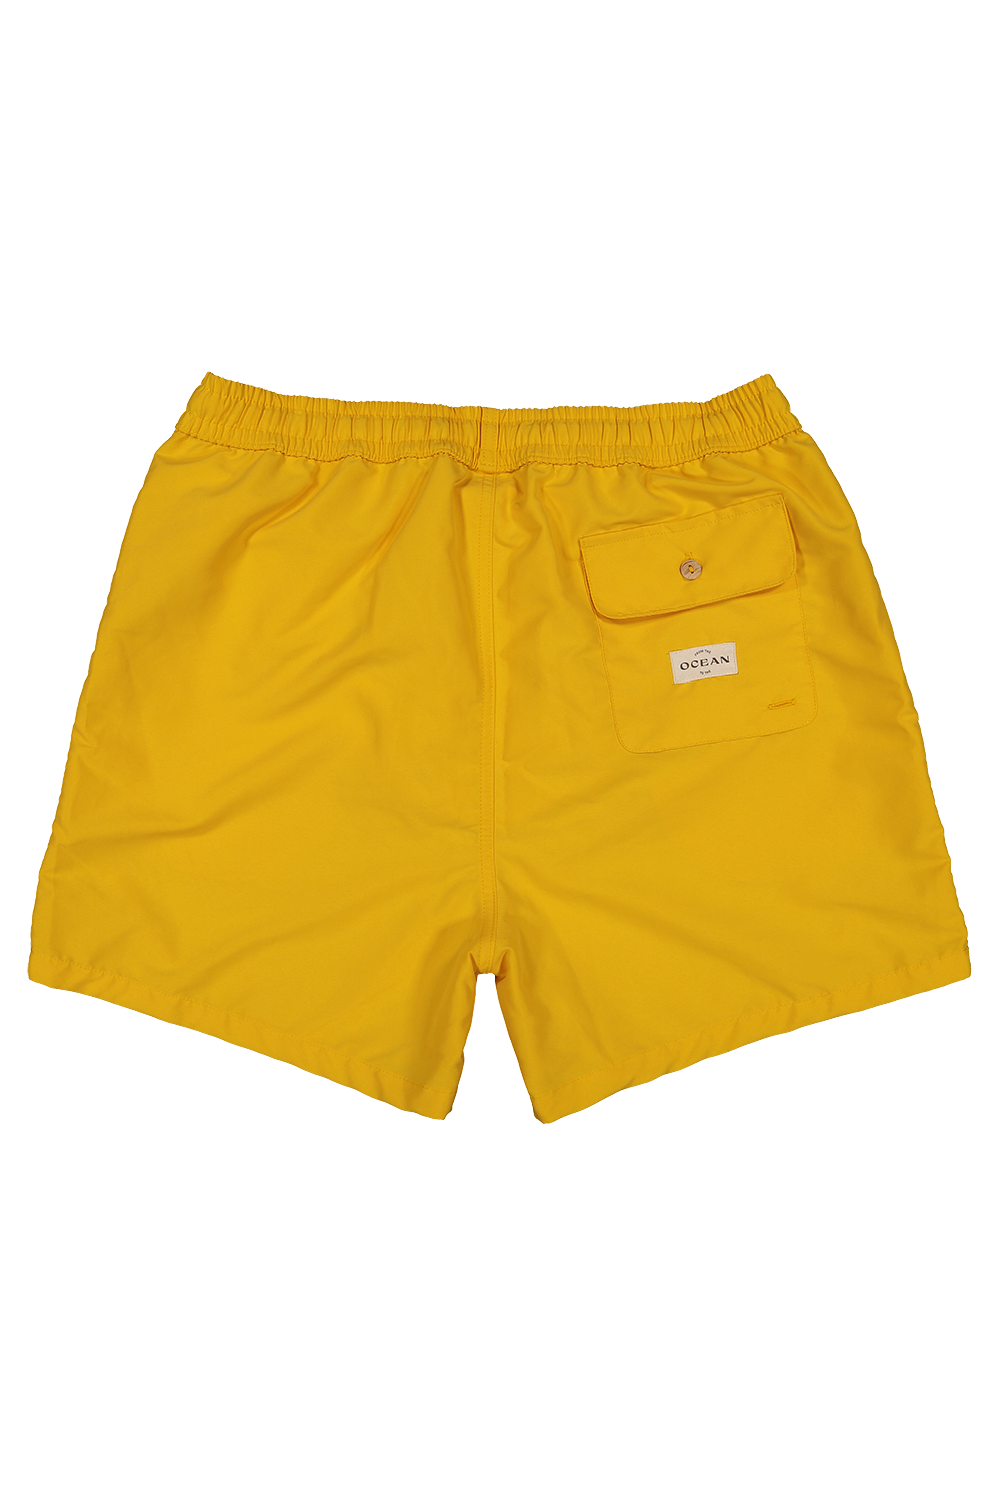 The Salty Circle Golden Hour Yellow Recycled Swim Shorts